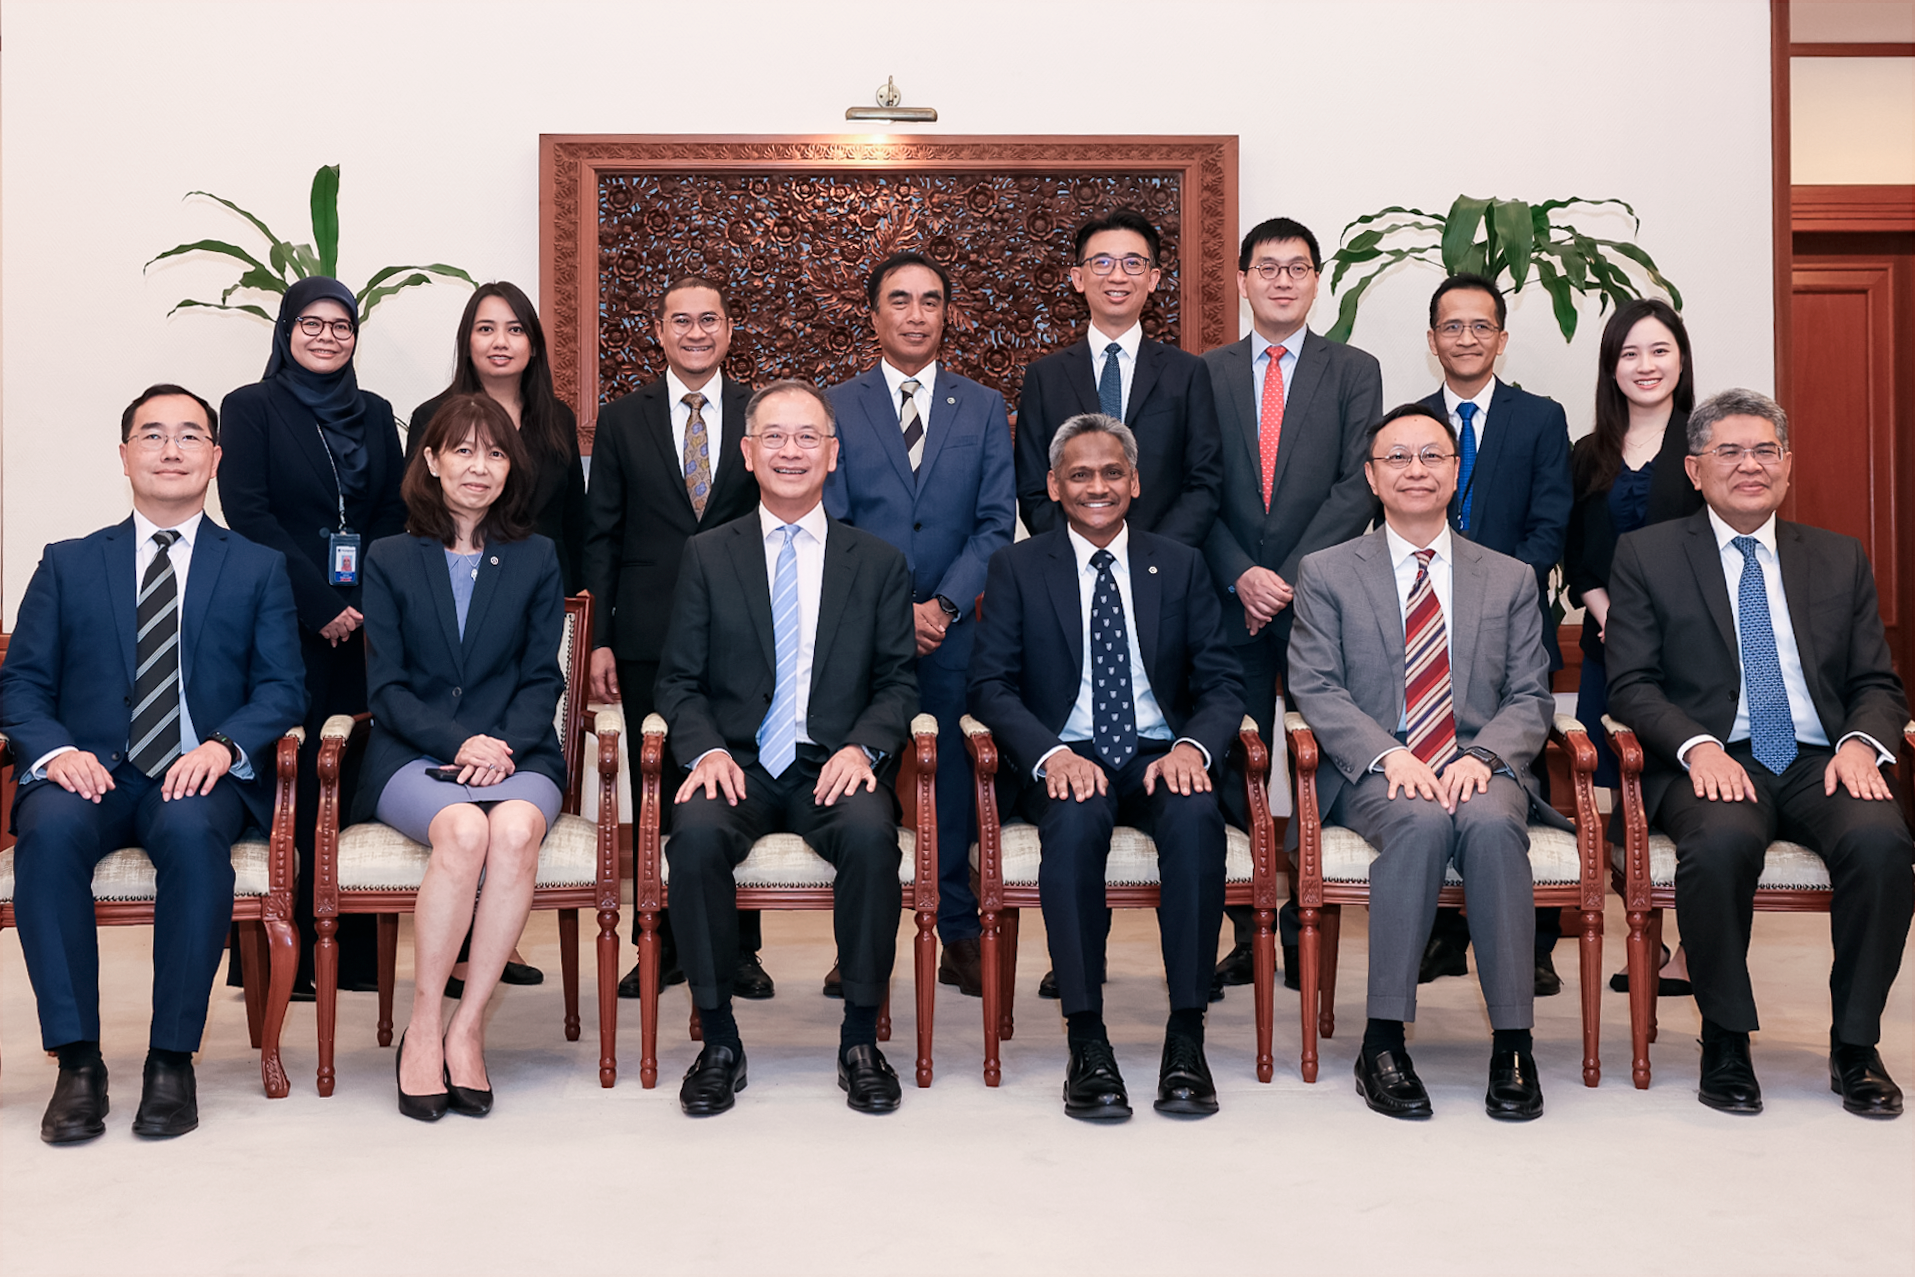 The Chief Executive of the Hong Kong Monetary Authority, Mr Eddie Yue, (front row, third left), and the Governor of the Bank Negara Malaysia Authority, Datuk Abdul Rasheed Ghaffour, (front row, third right), conducted a bilateral meeting on May 24 with delegates from both sides to enhance collaboration between the financial industry in the two jurisdictions.